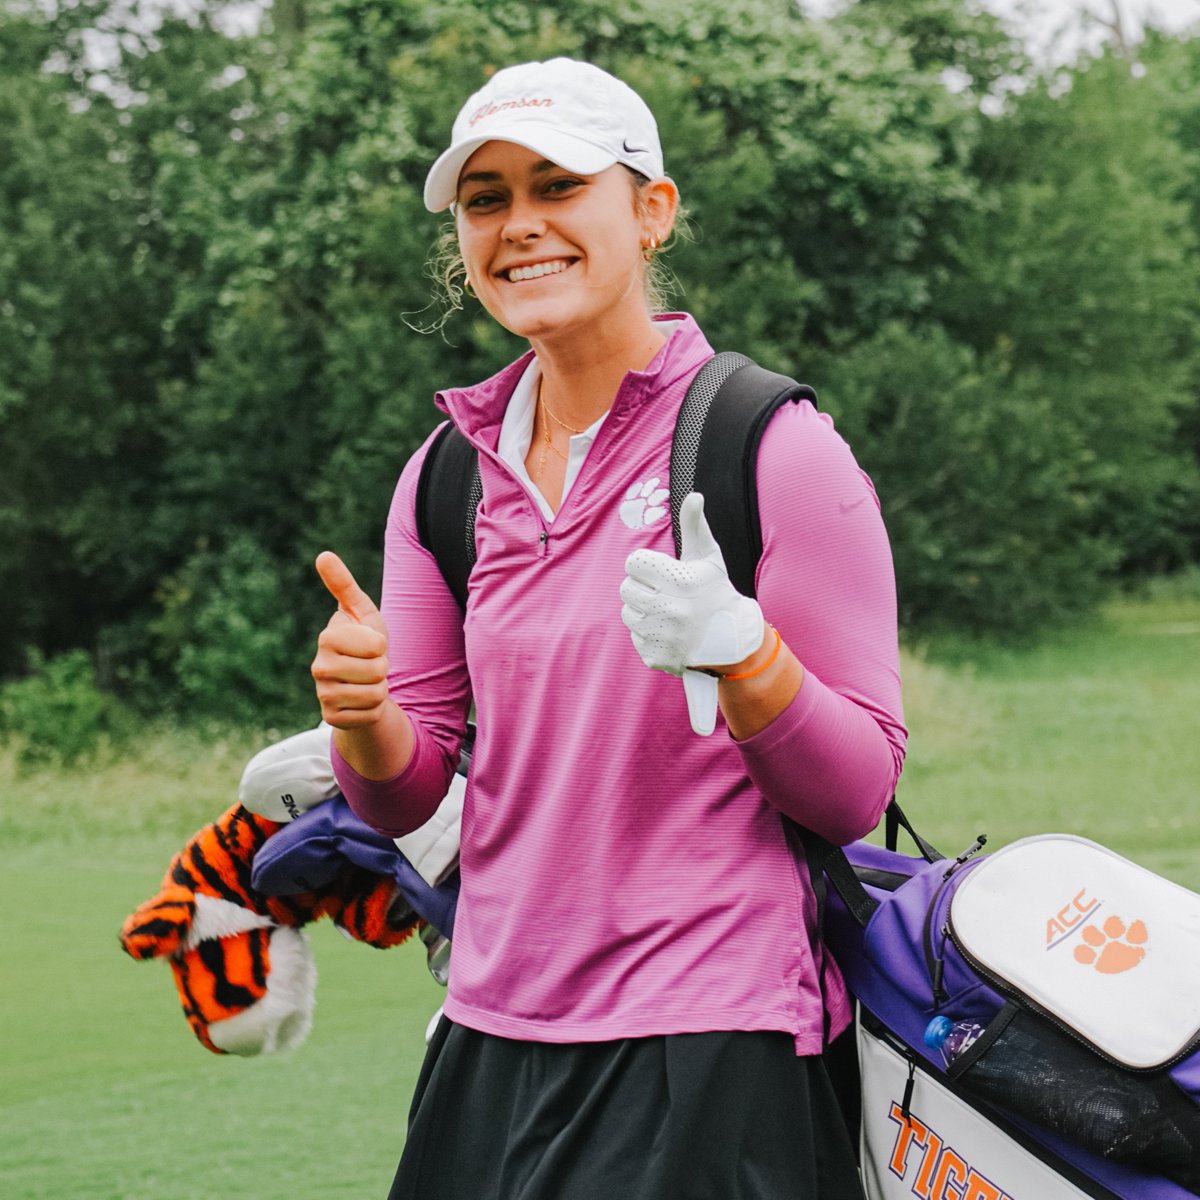 .@ClemsonWGolf is off to a 🔥🔥🔥 start during day two of the Bryan Regional! The Tigers are -6 and leading the regional through today's opening six holes! 👏⛳️